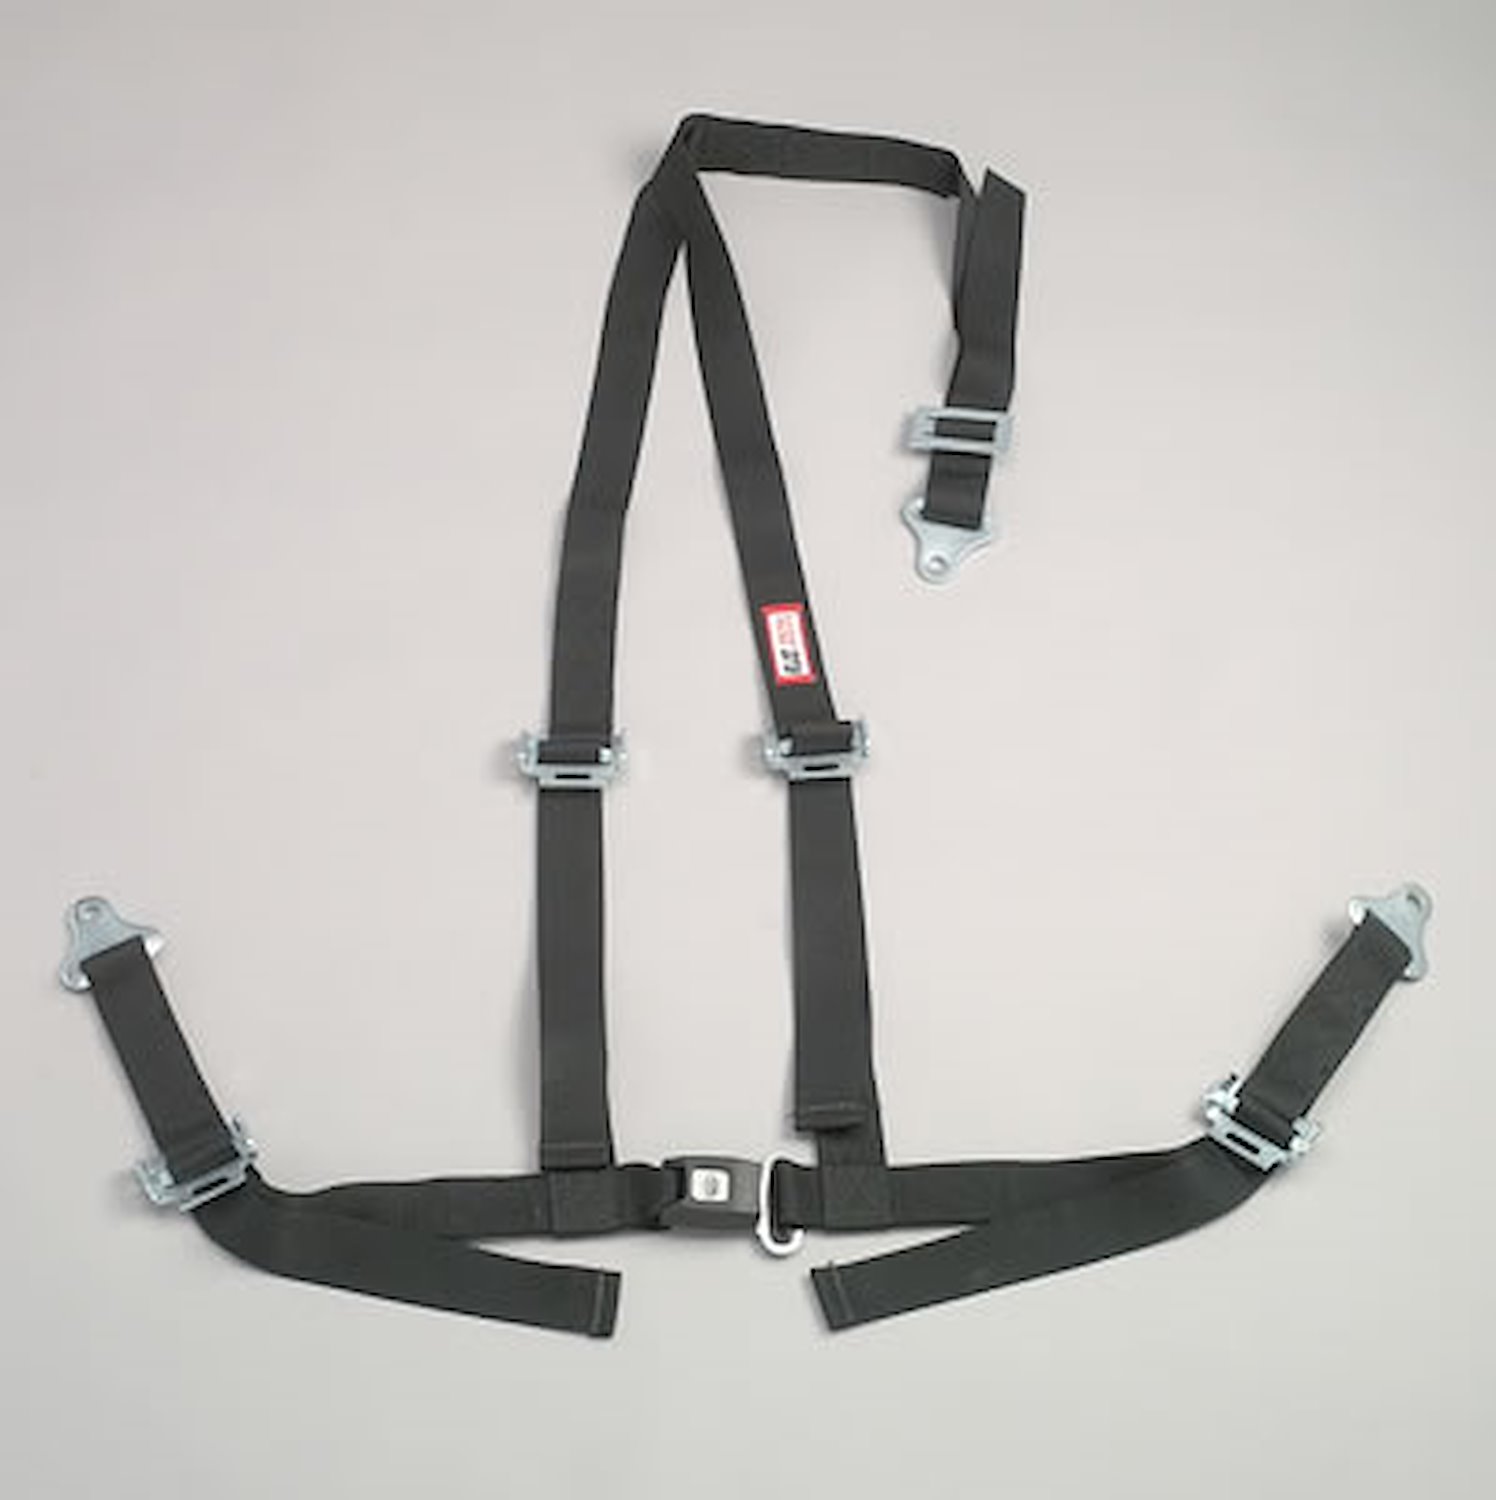 NON-SFI B&T HARNESS 2 PULL DOWN Lap Belt 2 S. H. Individual ROLL BAR Mount ALL WRAP ENDS w/STERNUM STRAP GRAY